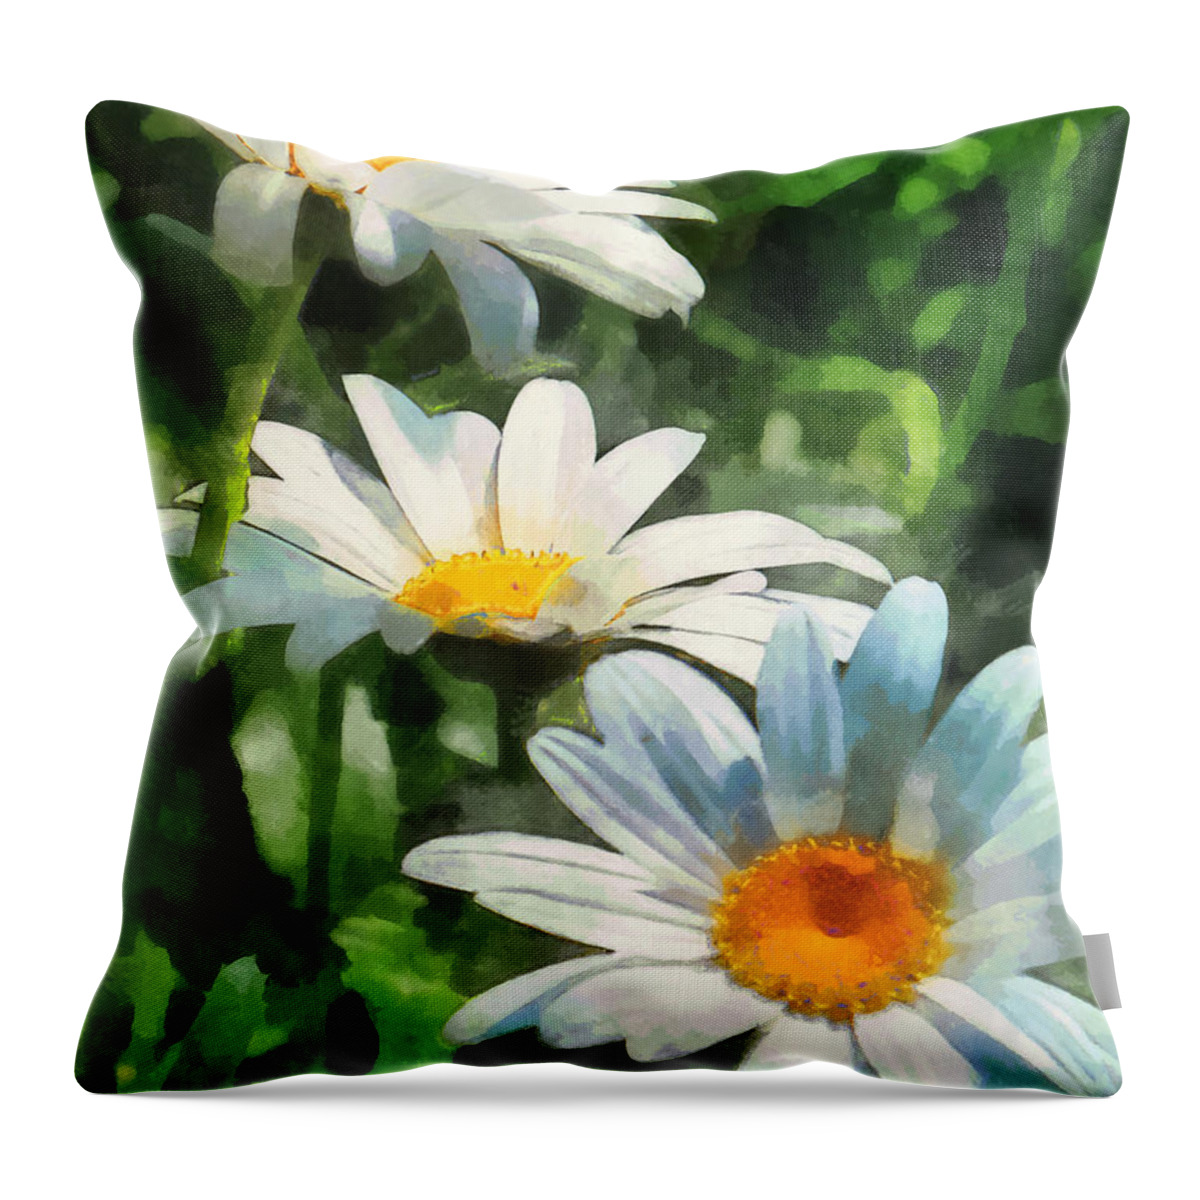 Daisy Throw Pillow featuring the photograph Gardens - Three White Daisies by Susan Savad